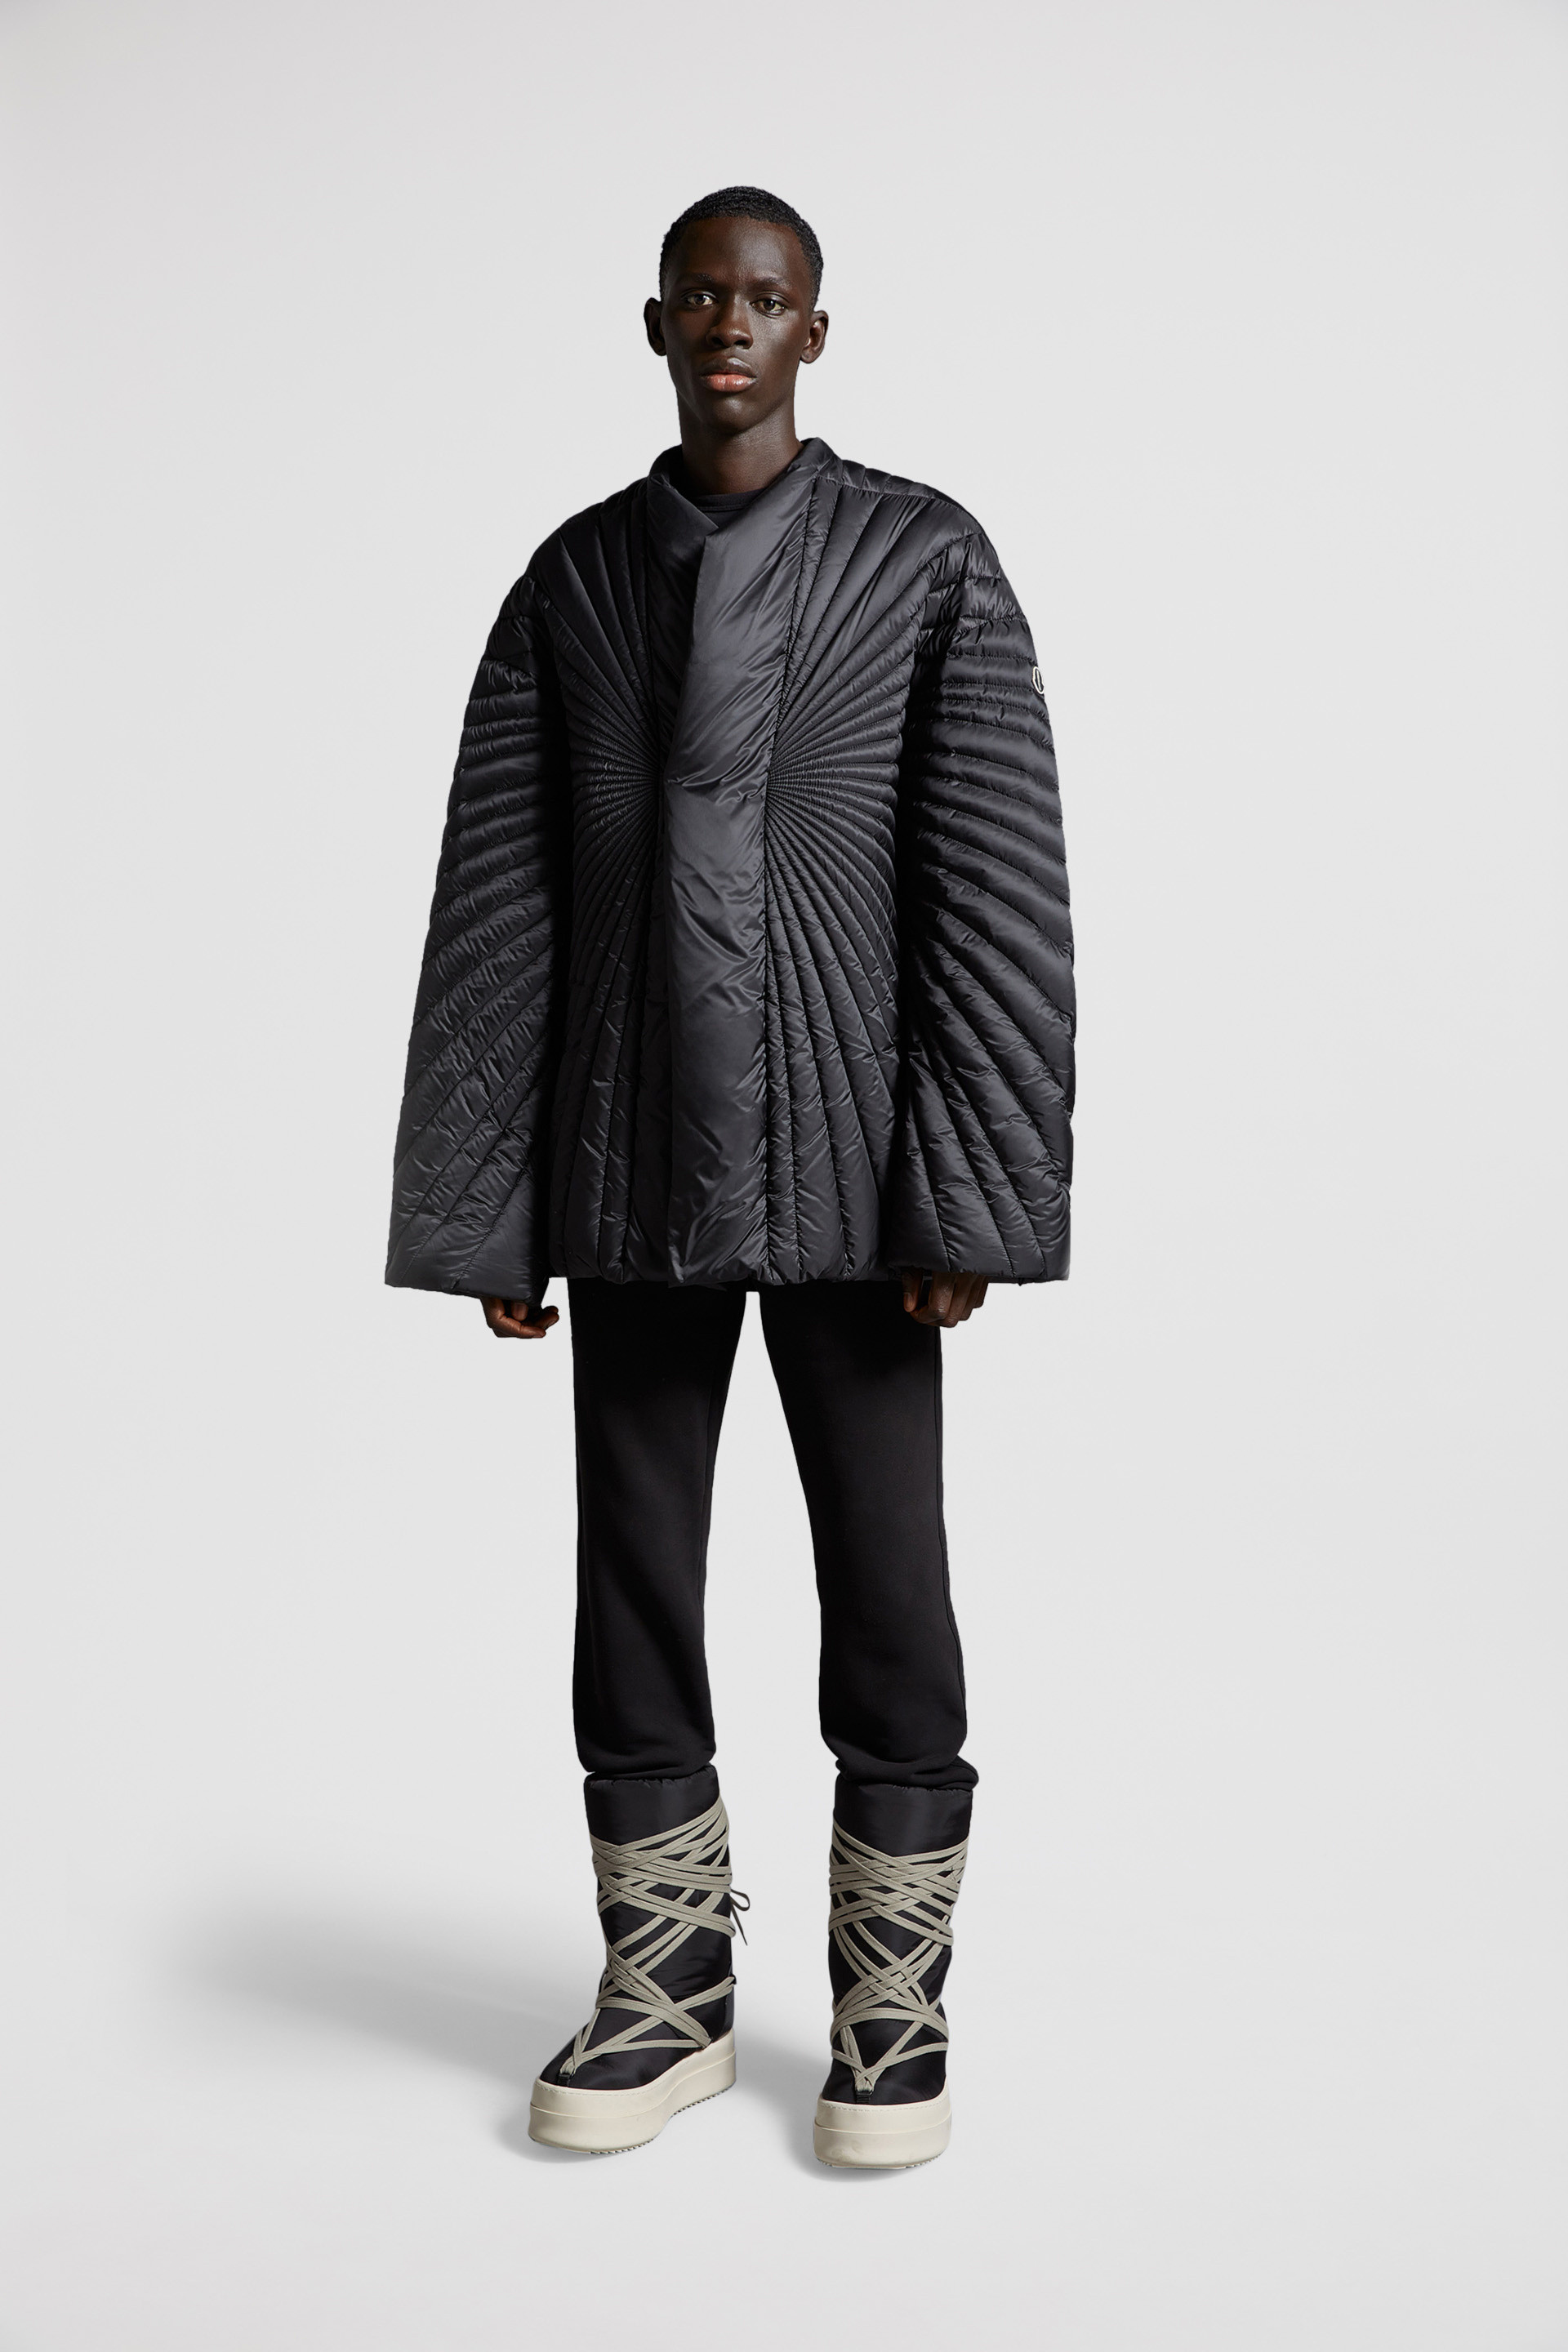 For Special Projects - Moncler + Rick Owens | Moncler HK